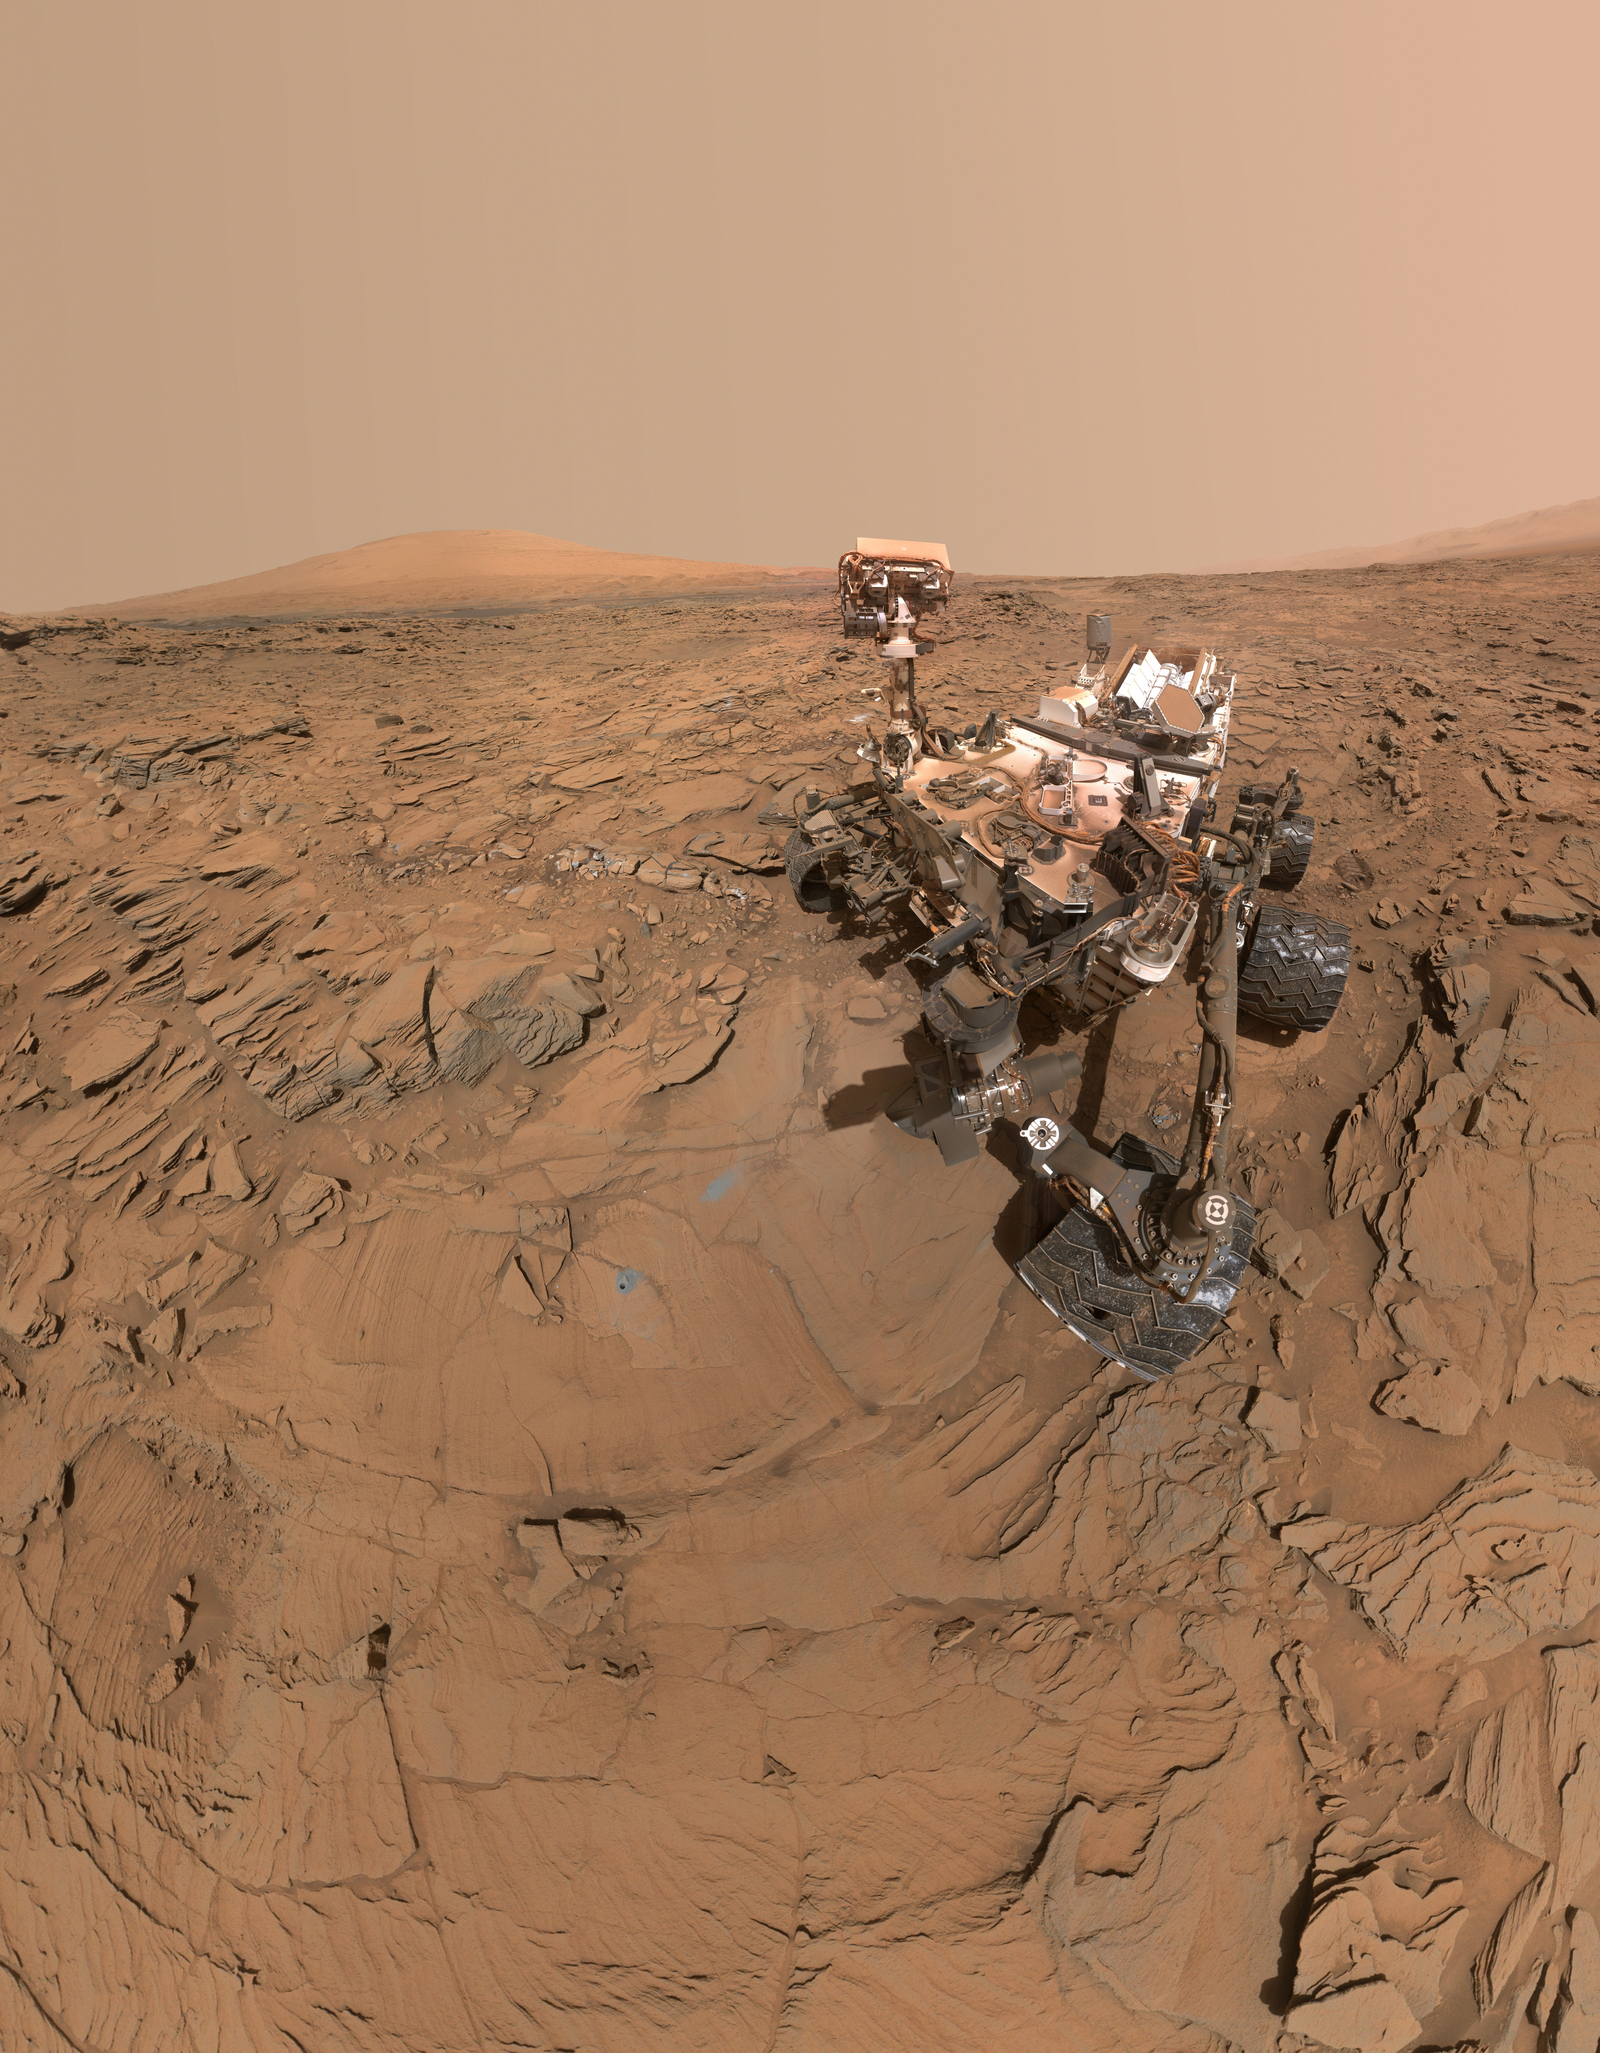 The top of the rover's mast faces away in this May 11, 2016, self-portrait of NASA's Curiosity Mars rover, which shows the vehicle at the "Okoruso" drilling site on lower Mount Sharp. The scene is a mosaic of multiple images taken with the arm-mounted Mars Hands Lens Imager (MAHLI).